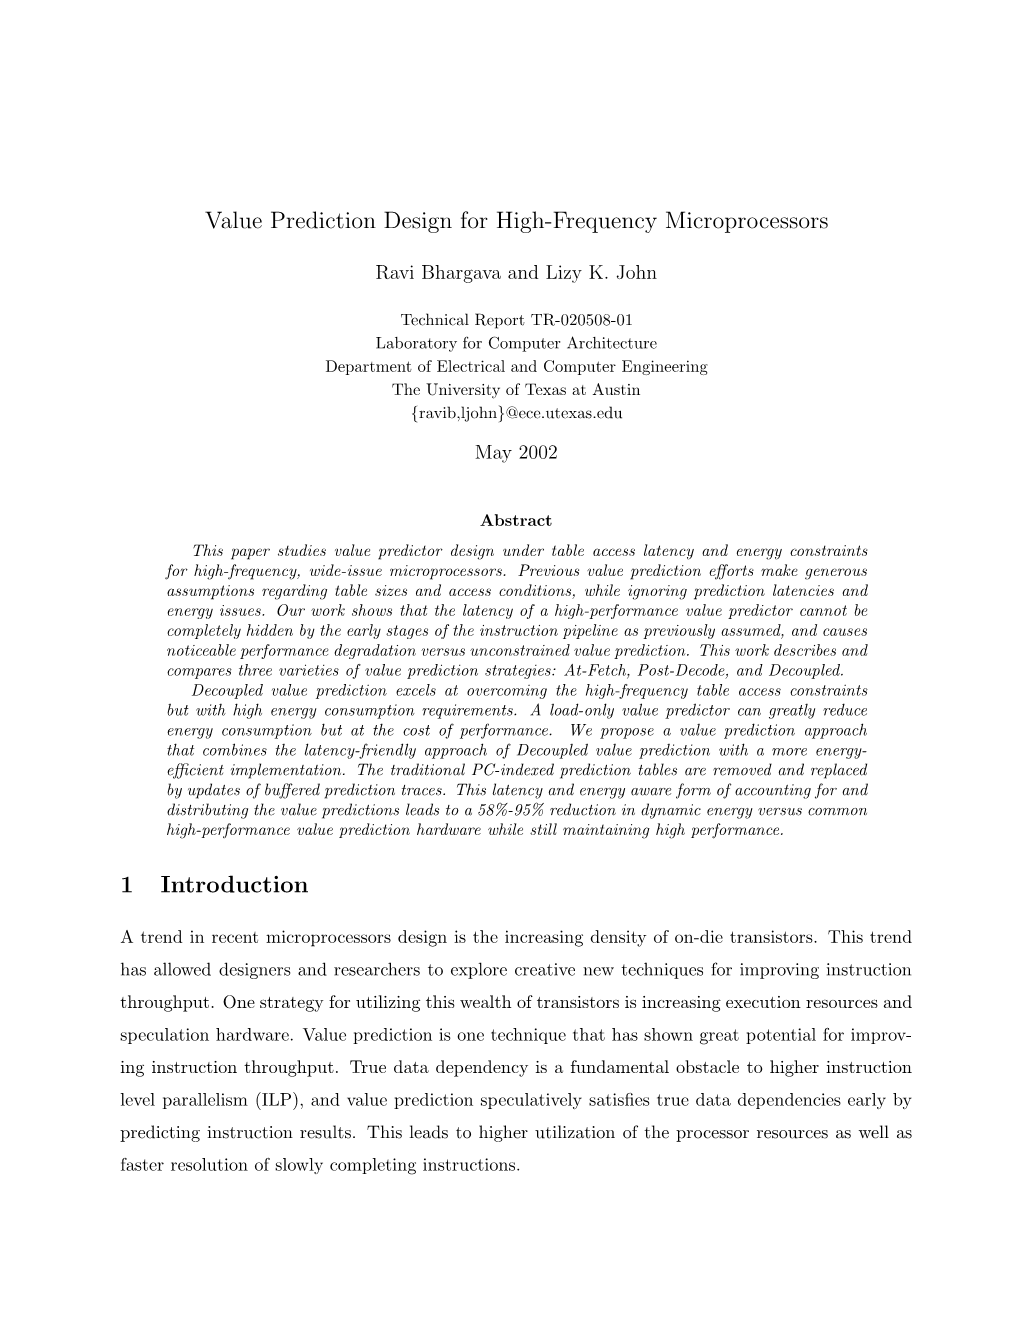 Value Prediction Design for High-Frequency Microprocessors 1